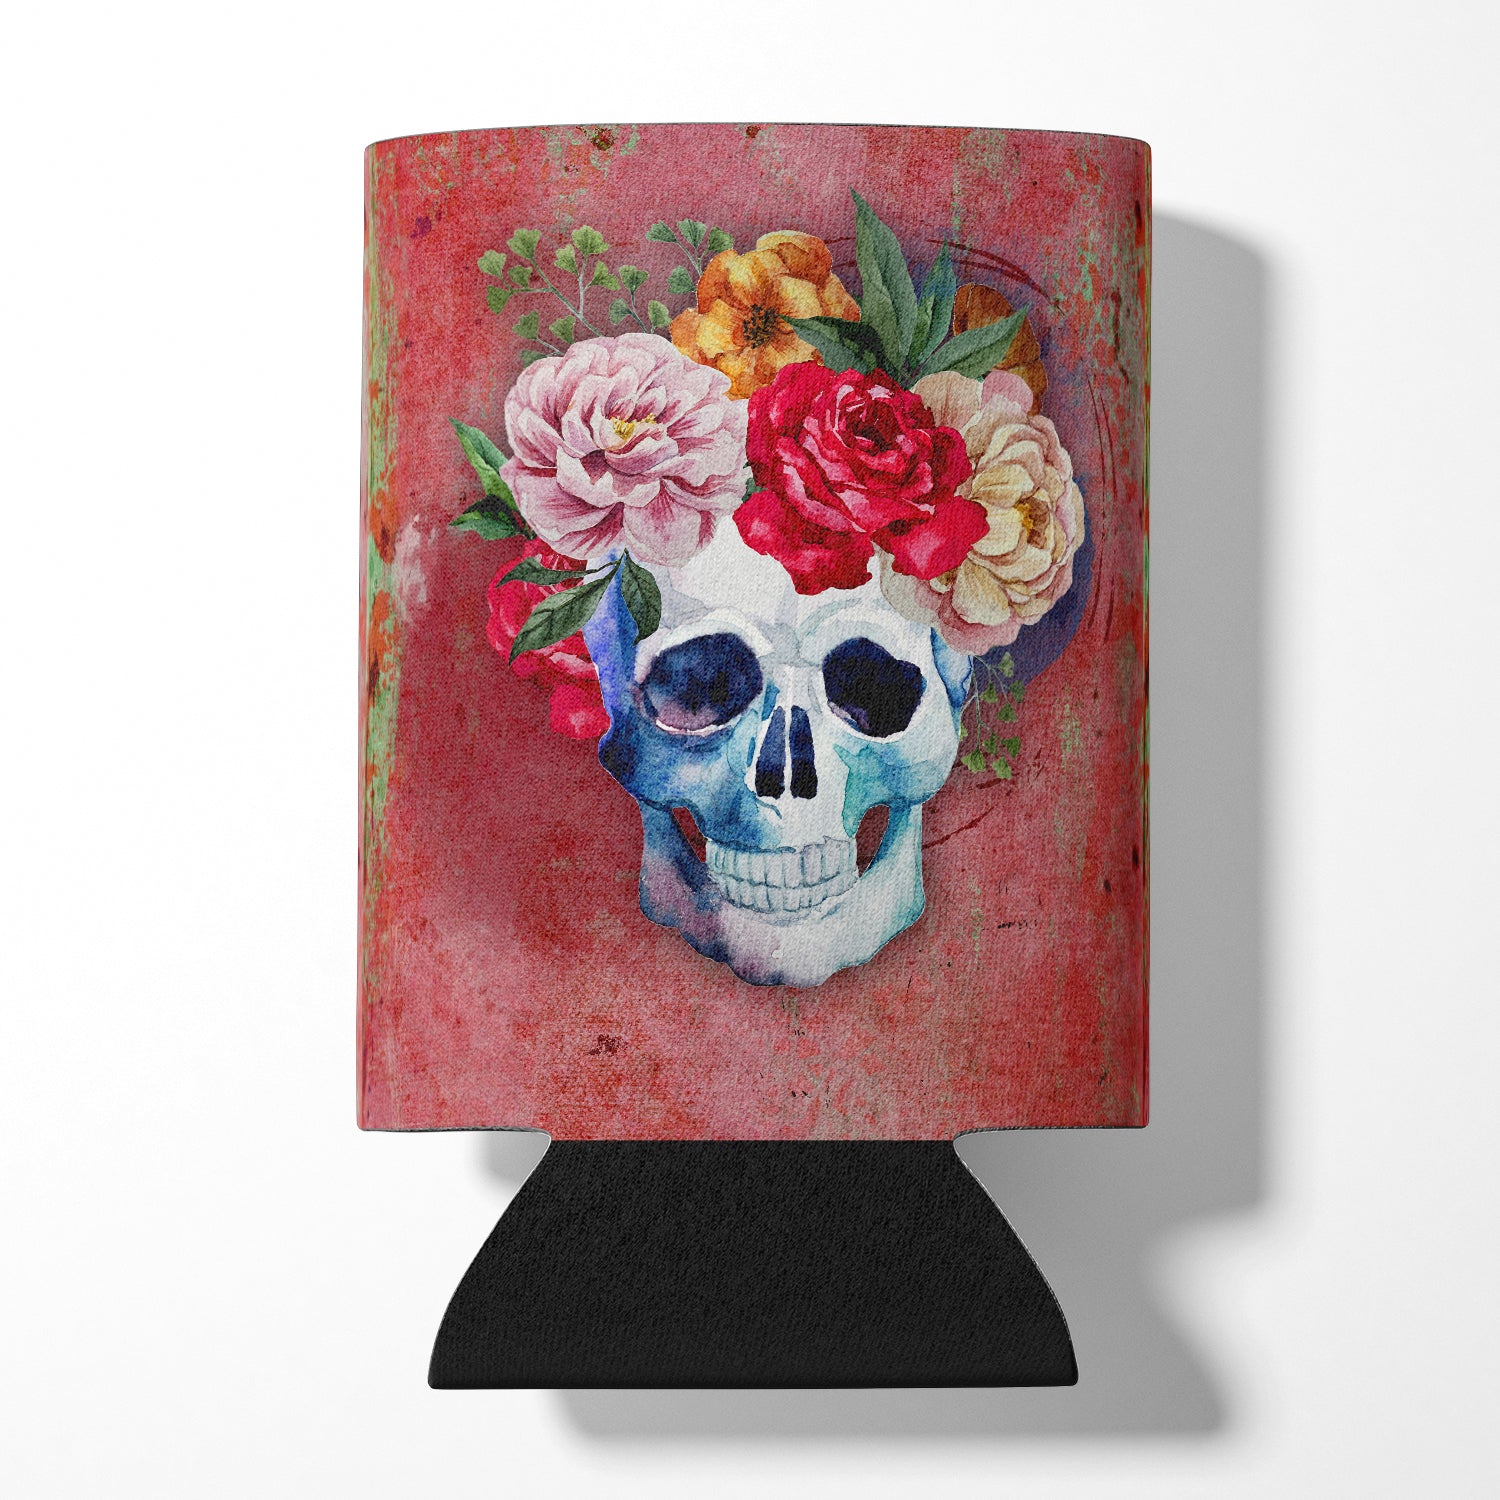 Day of the Dead Red Flowers Skull  Can or Bottle Hugger BB5130CC  the-store.com.